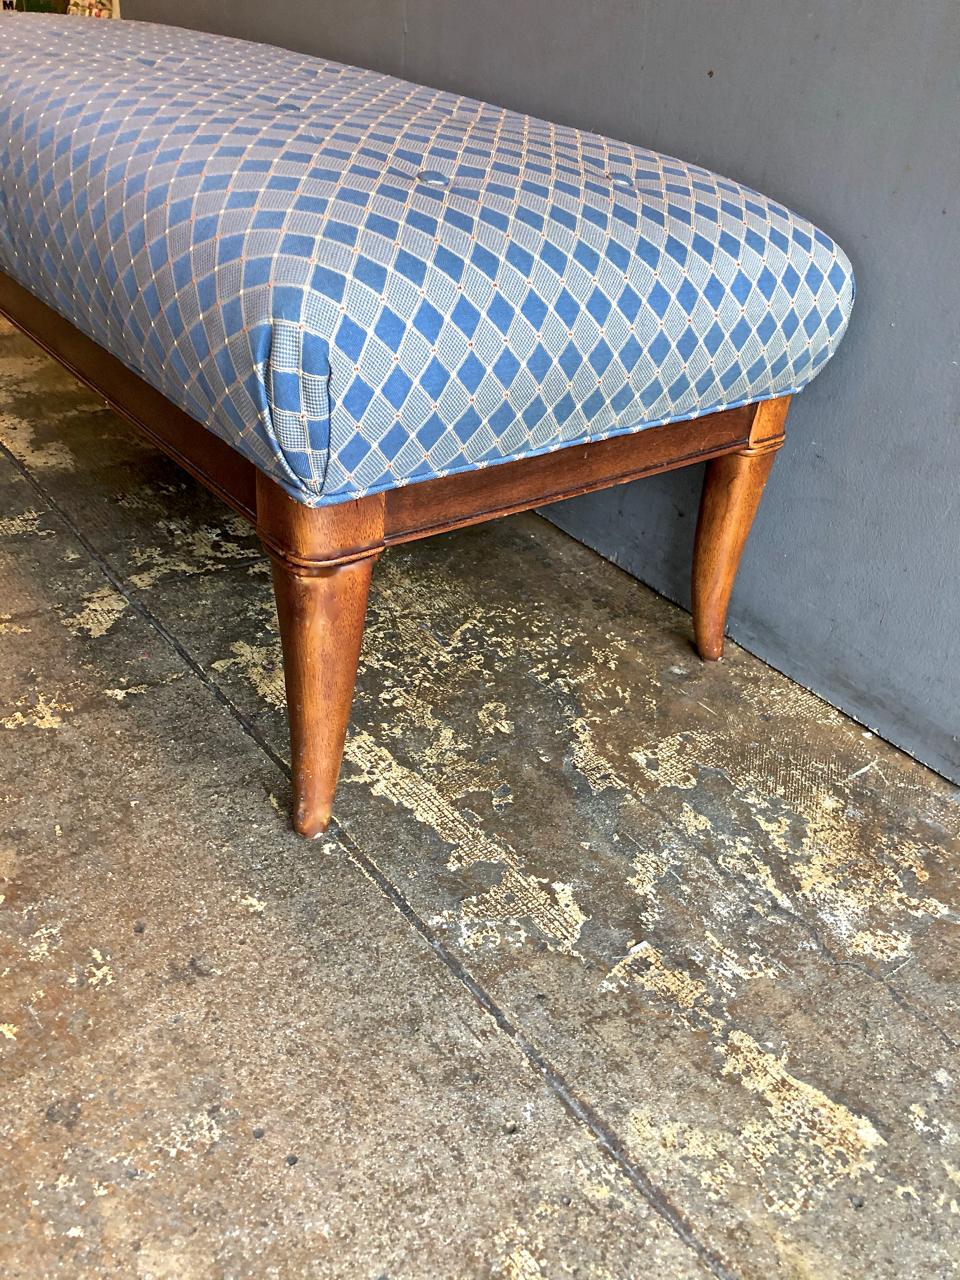 This is a wonderful saber-legged bench that dates to the mid-20th century. The bench is in overall very good condition with vintage upholstery. This is the perfect end-of-the-bed detail.